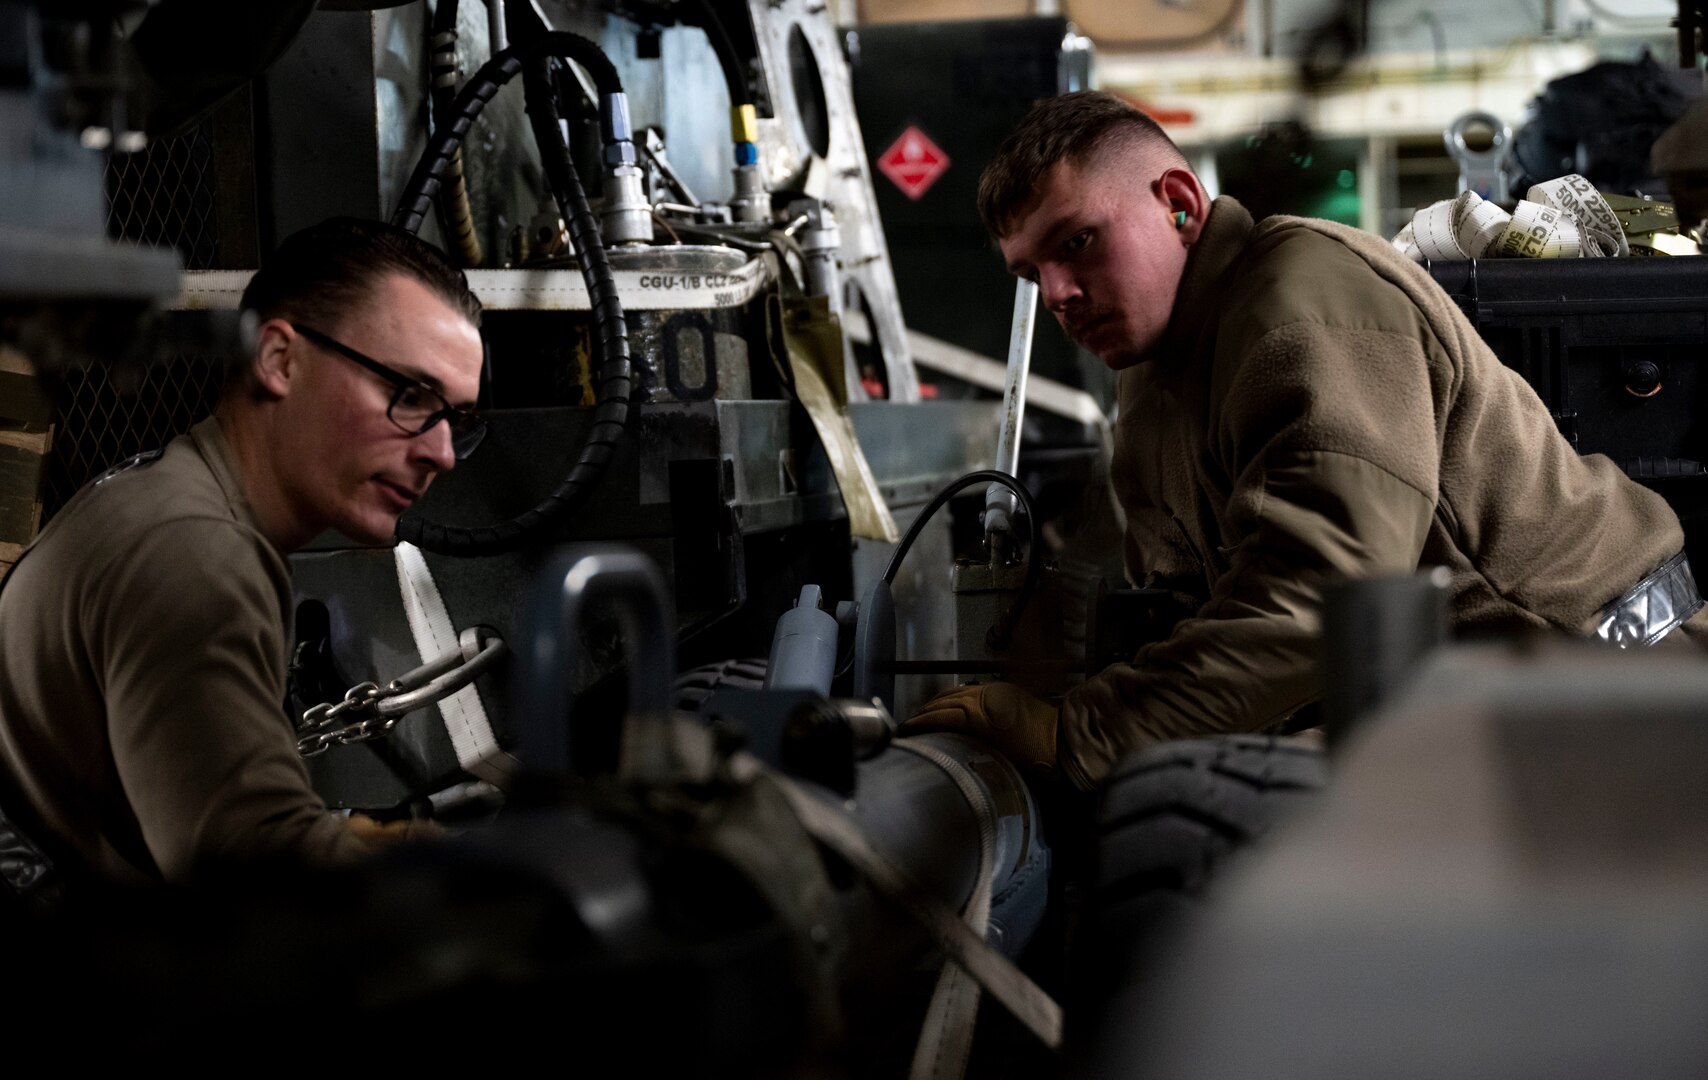 U.S. Air Force Senior Airman Rusty Thompson, 28th Logistic Readiness Squadron air transportation technician (Left) a nd Airman 1st Class Hunter Corcoran, 28th LRS air transportation technician secure cargo onto a C-17  Globemaster III at Ellsworth Air Force Base, South Dakota during a partner integration mission in support of Exercise COPE INDIA 23, April 6, 2023. The U.S. is an Indo-Pacific nation and will remain engaged in the region.  (U.S. Air Force Photo by Airman 1st Class Yendi Borjas)